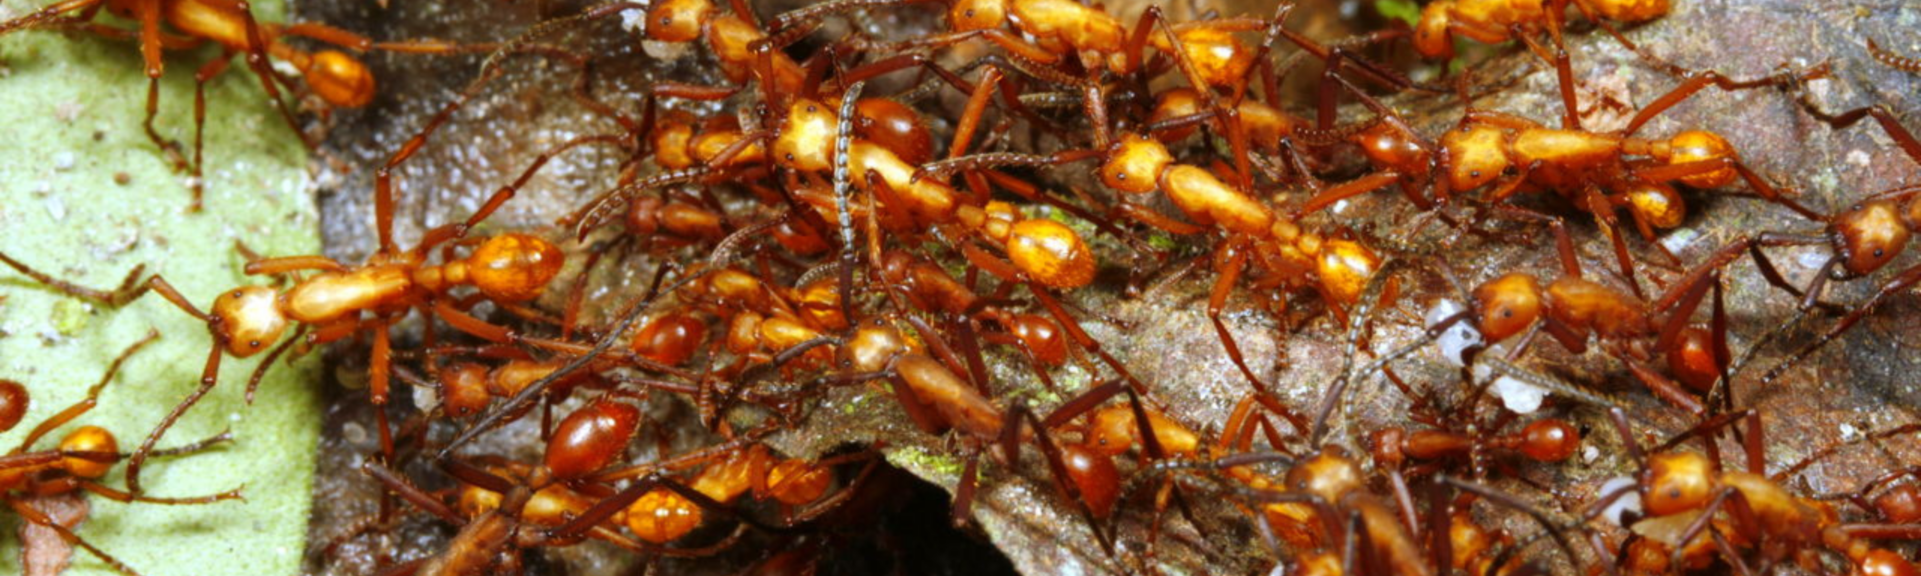 Crazy Ants: How to Get Rid of Crazy Ants?